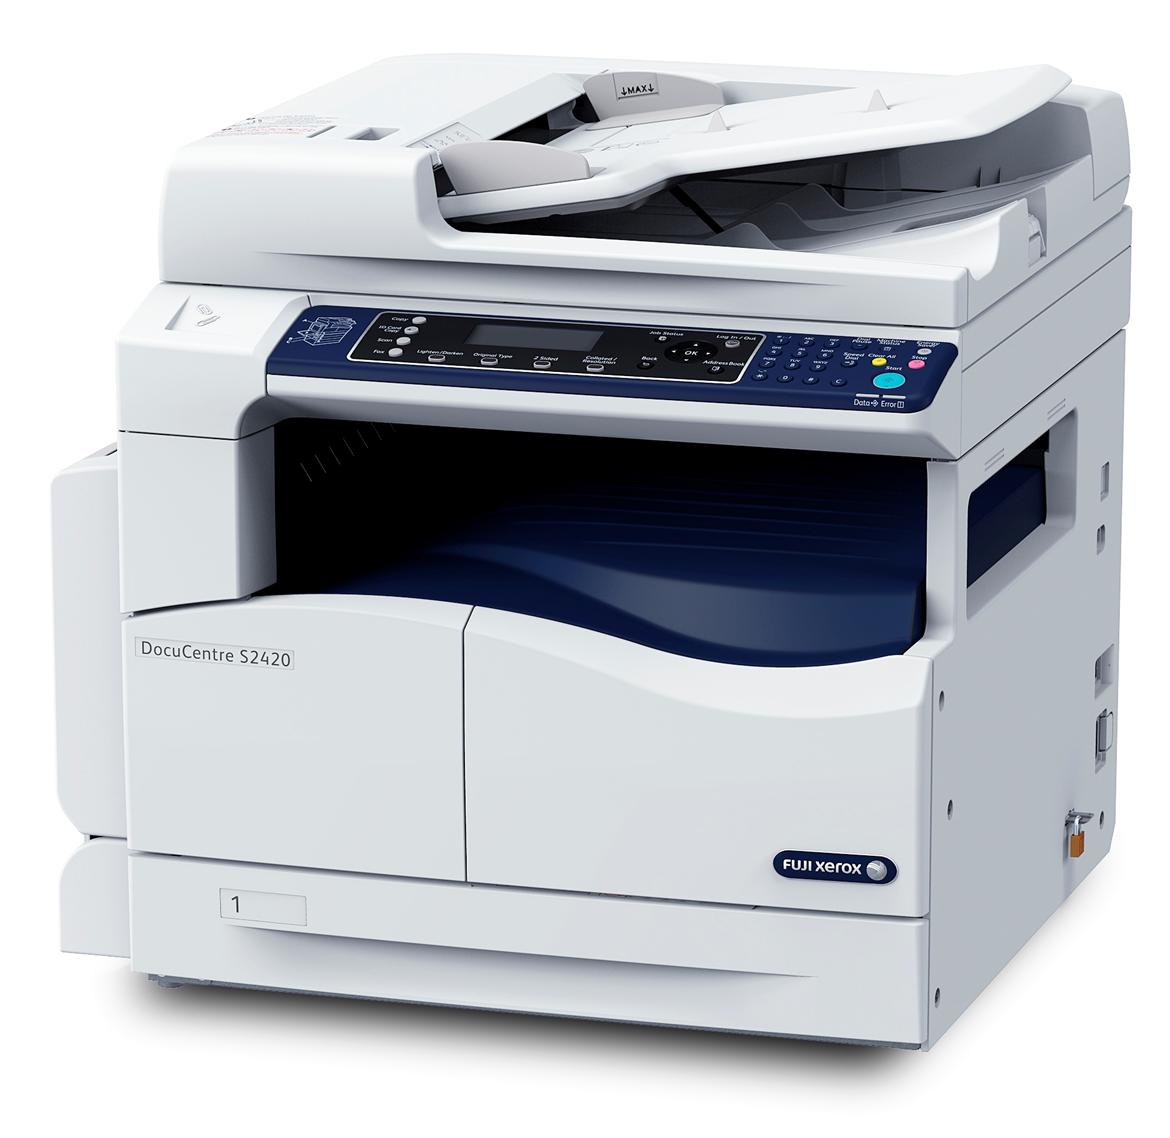 Image of a photocopier